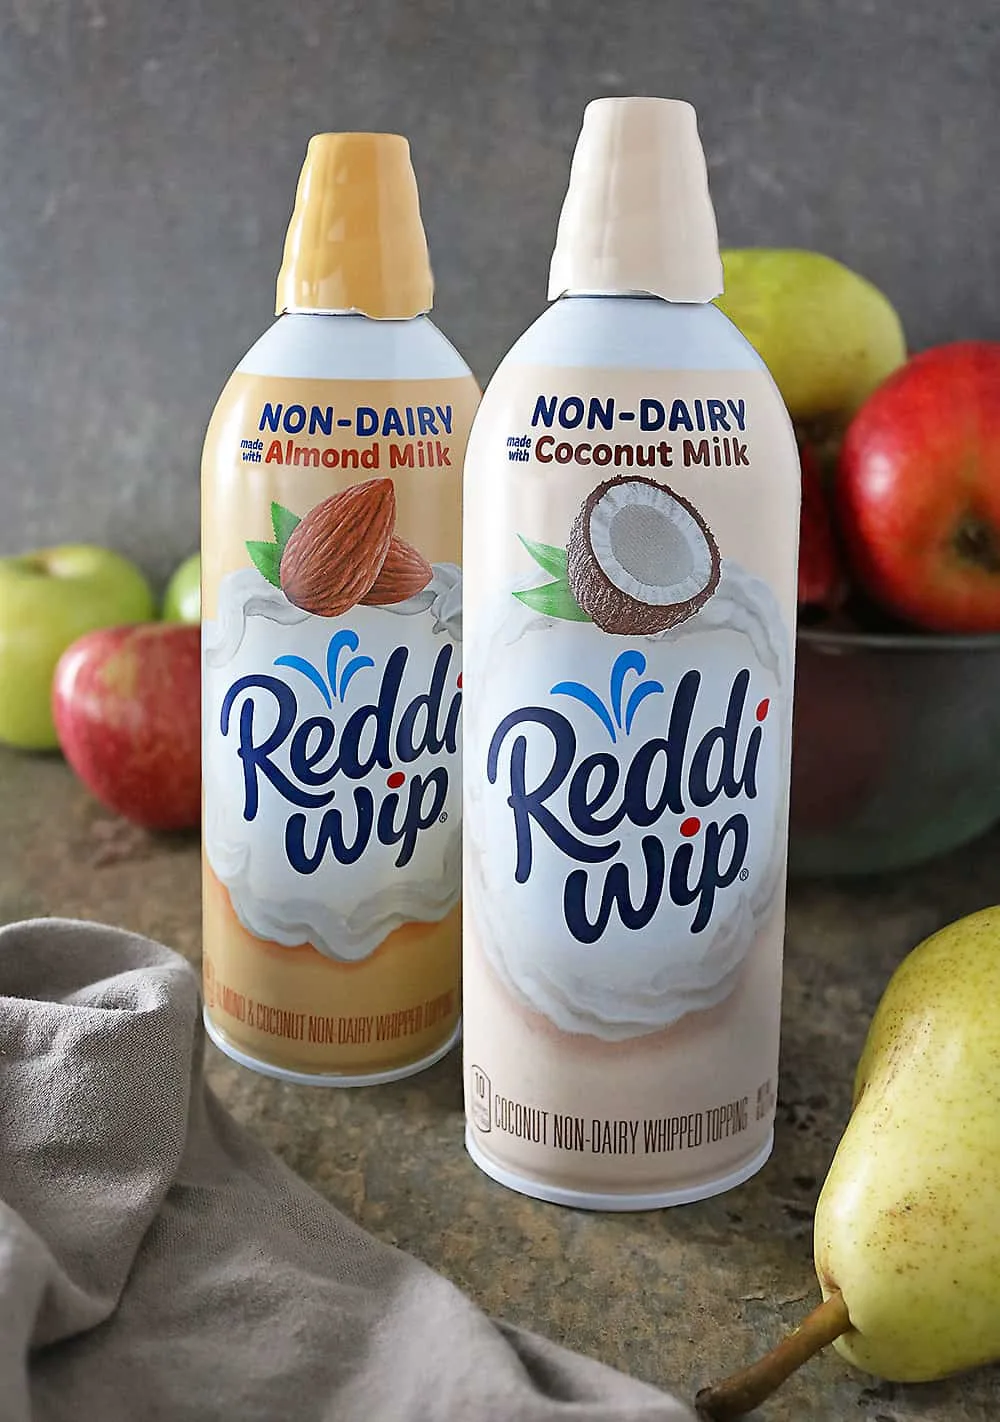 Reddi wip Non Dairy whipped topping photo